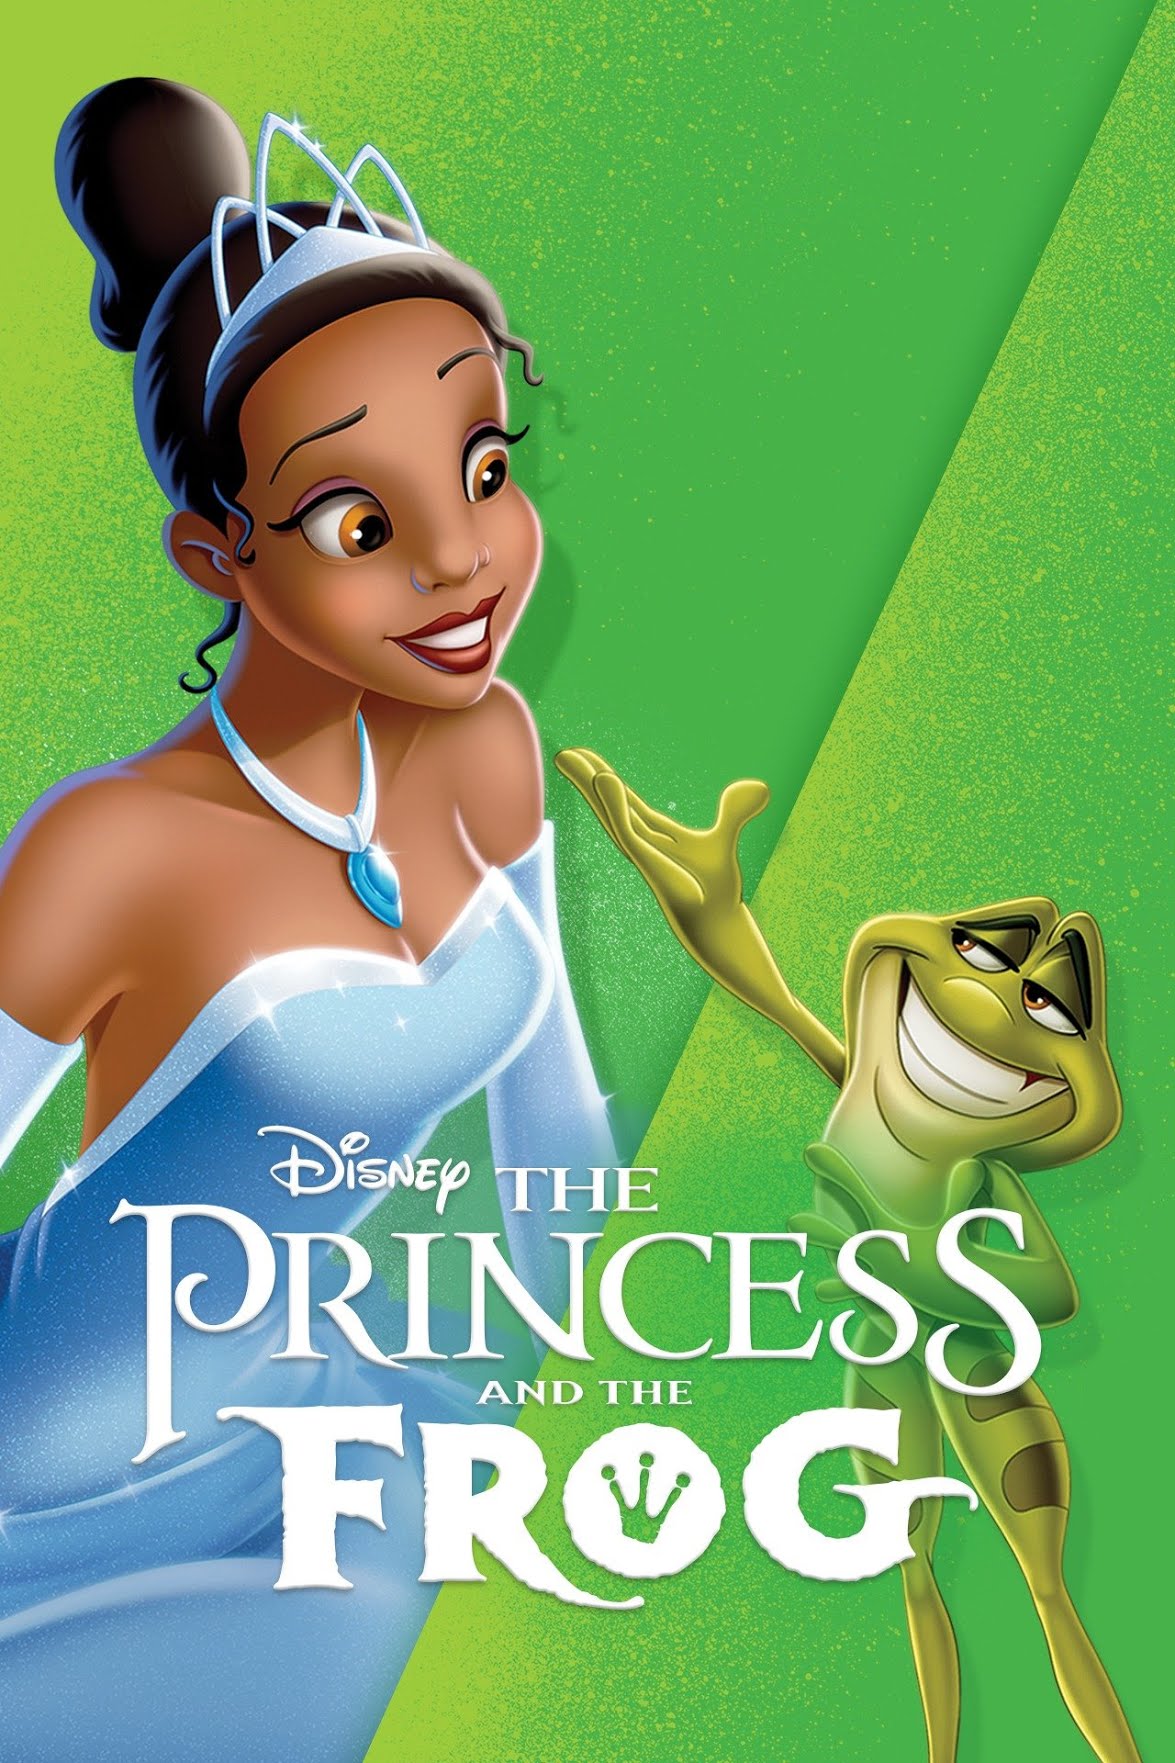 Image of the movie poster for Disney's animated The Princess and the Frog.